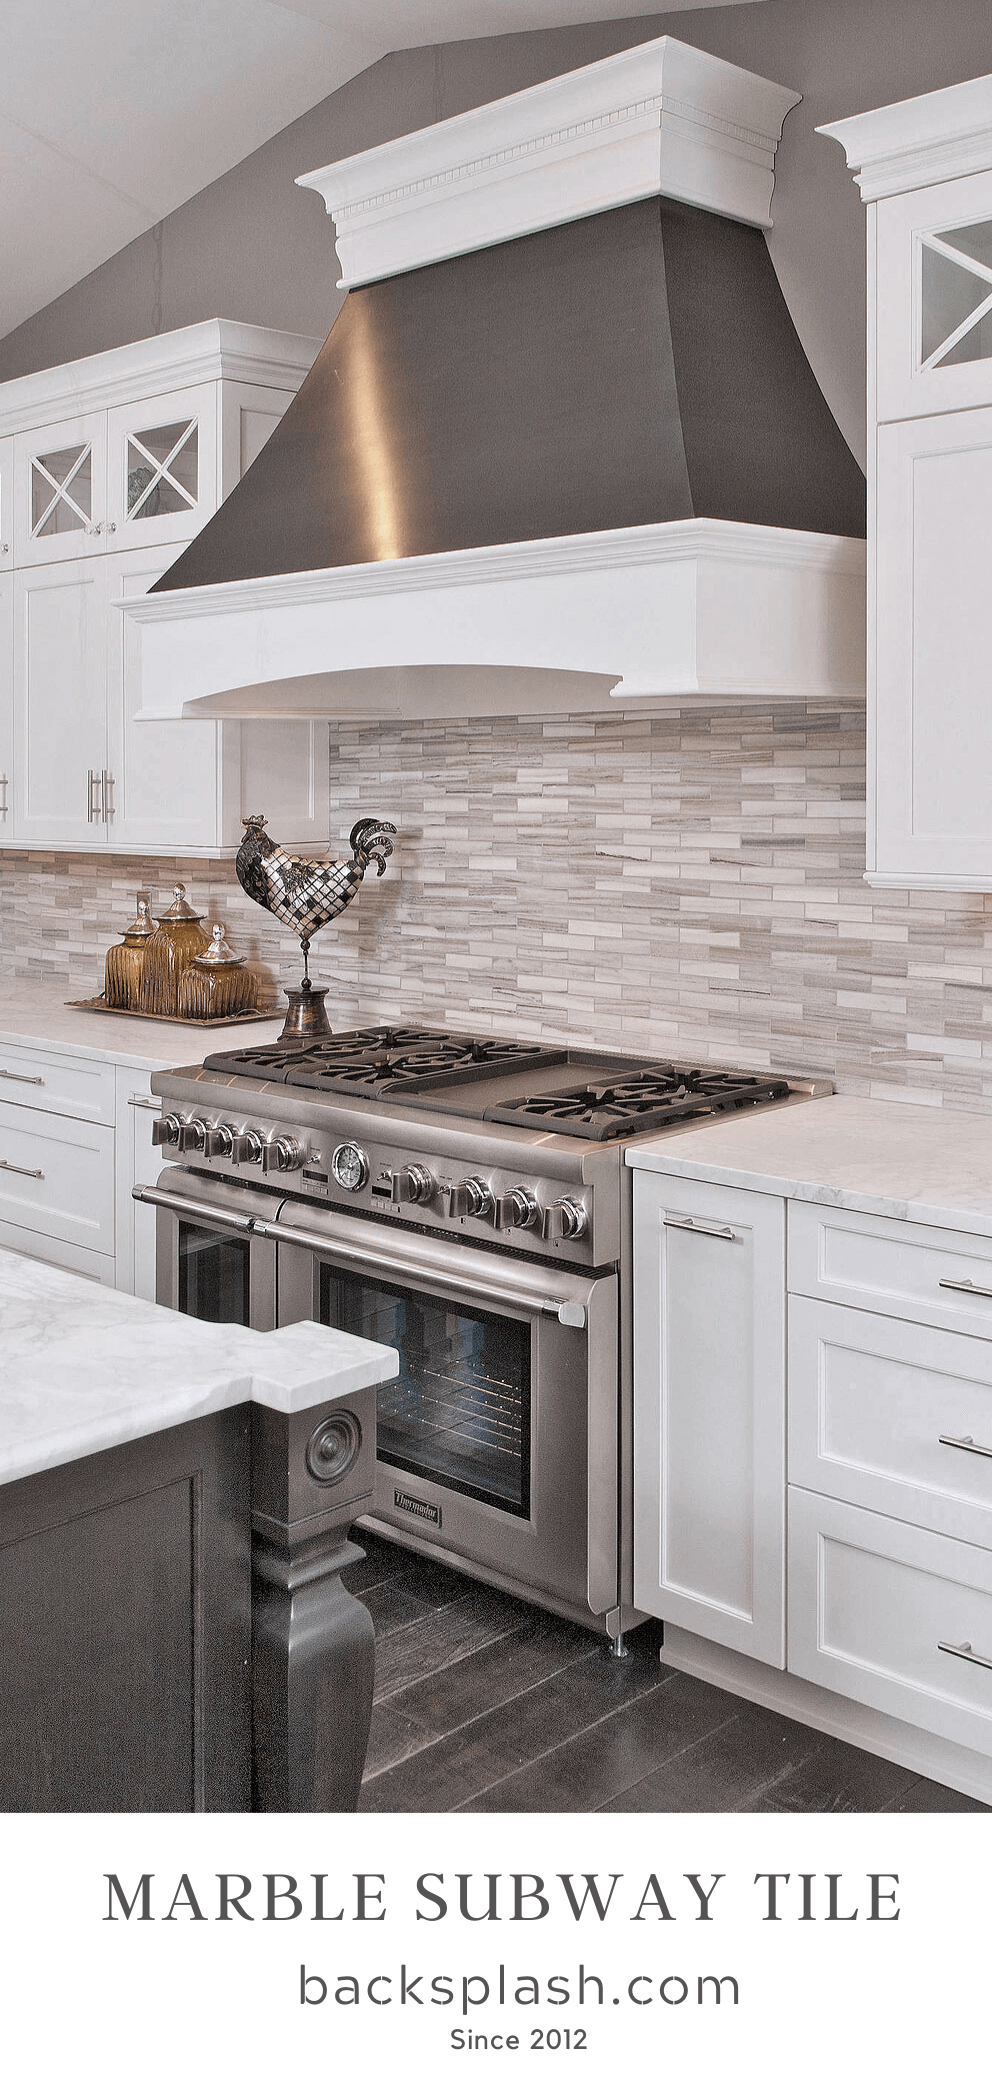 White Kitchen with Brown Cabinets Modern Marble Kitchen Backsplash Tile BA1034 #whitekitchenbacksplash #whitebacksplash#modernbacksplash #whitegraybacksplash #marblebacksplash #subwaybacksplash #whitemarblebacksplash